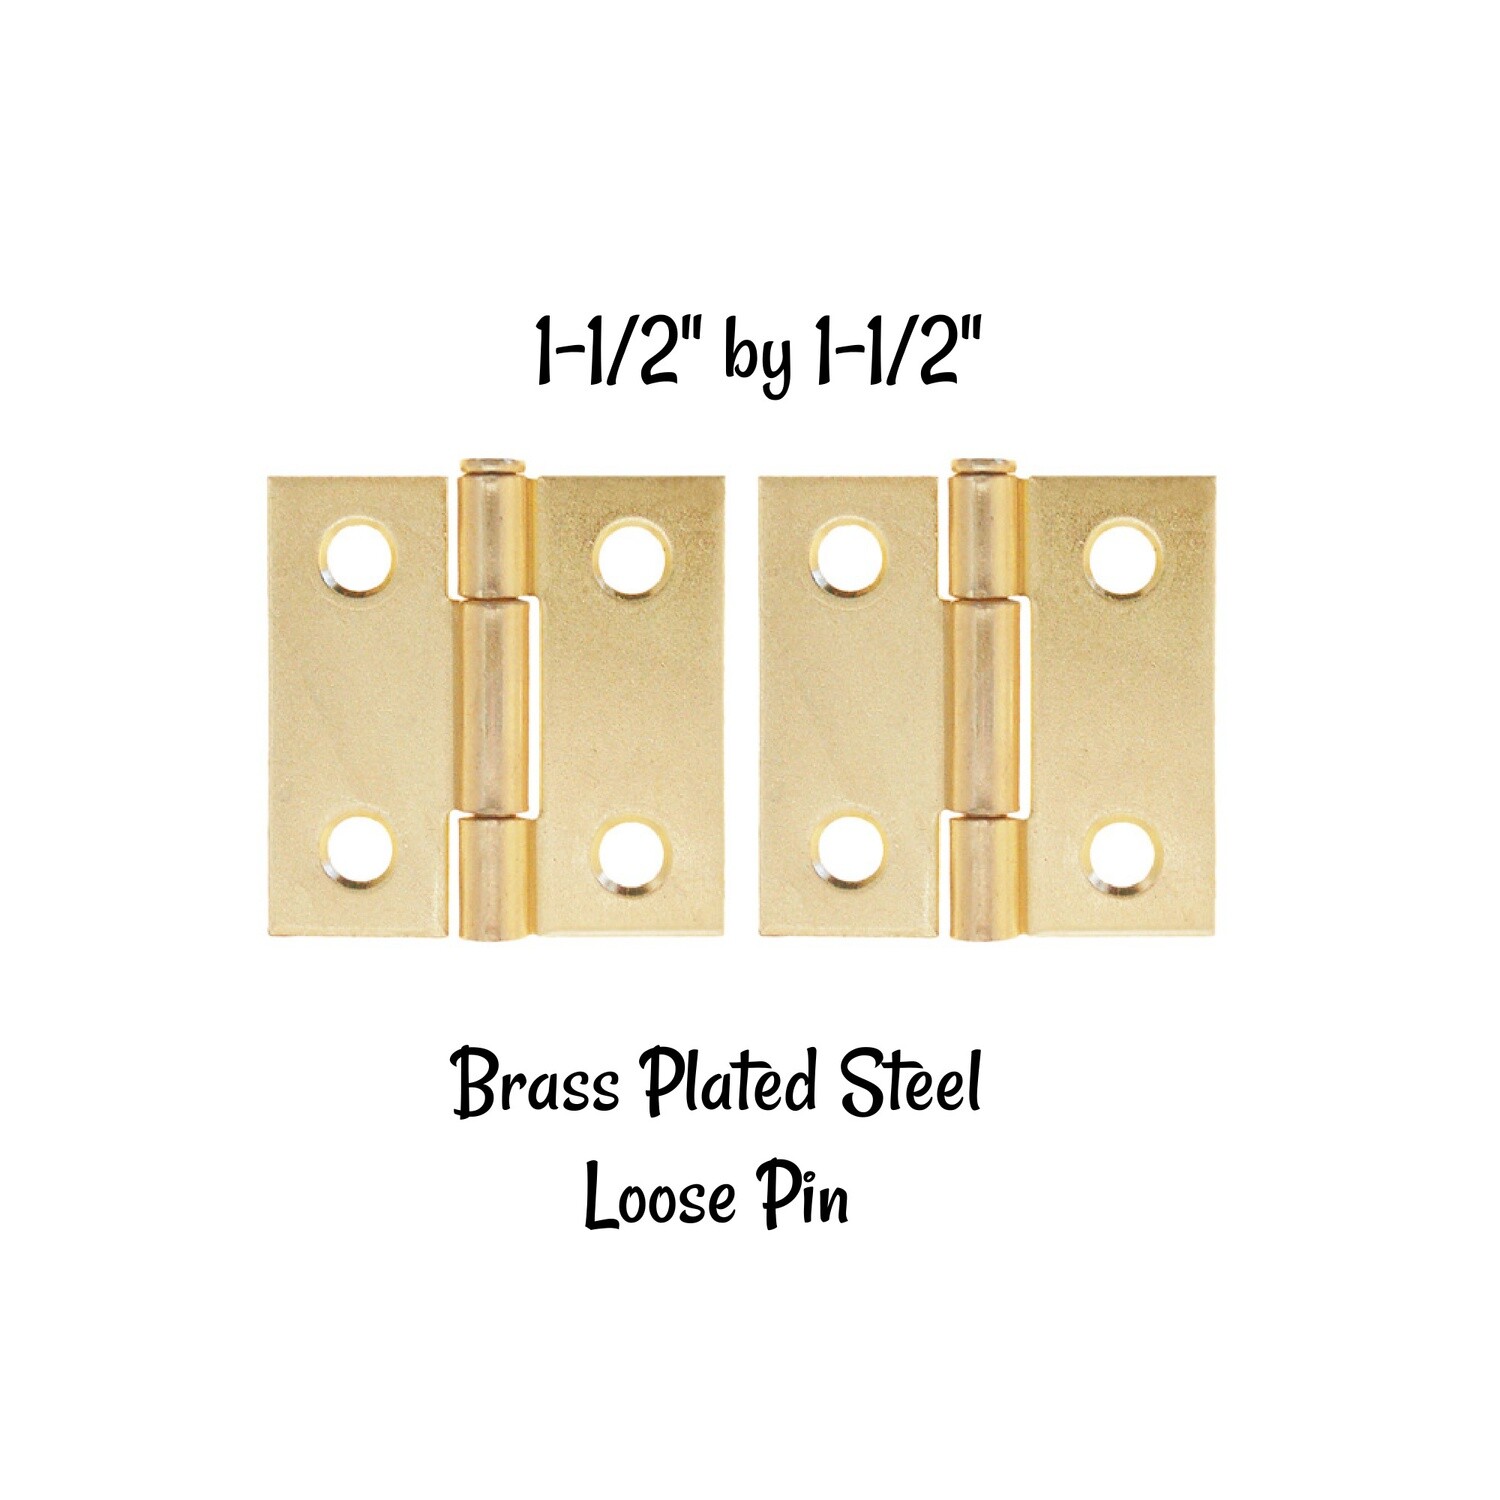 Brass Plated Steel -- Loose Pin Cabinet Hinge -